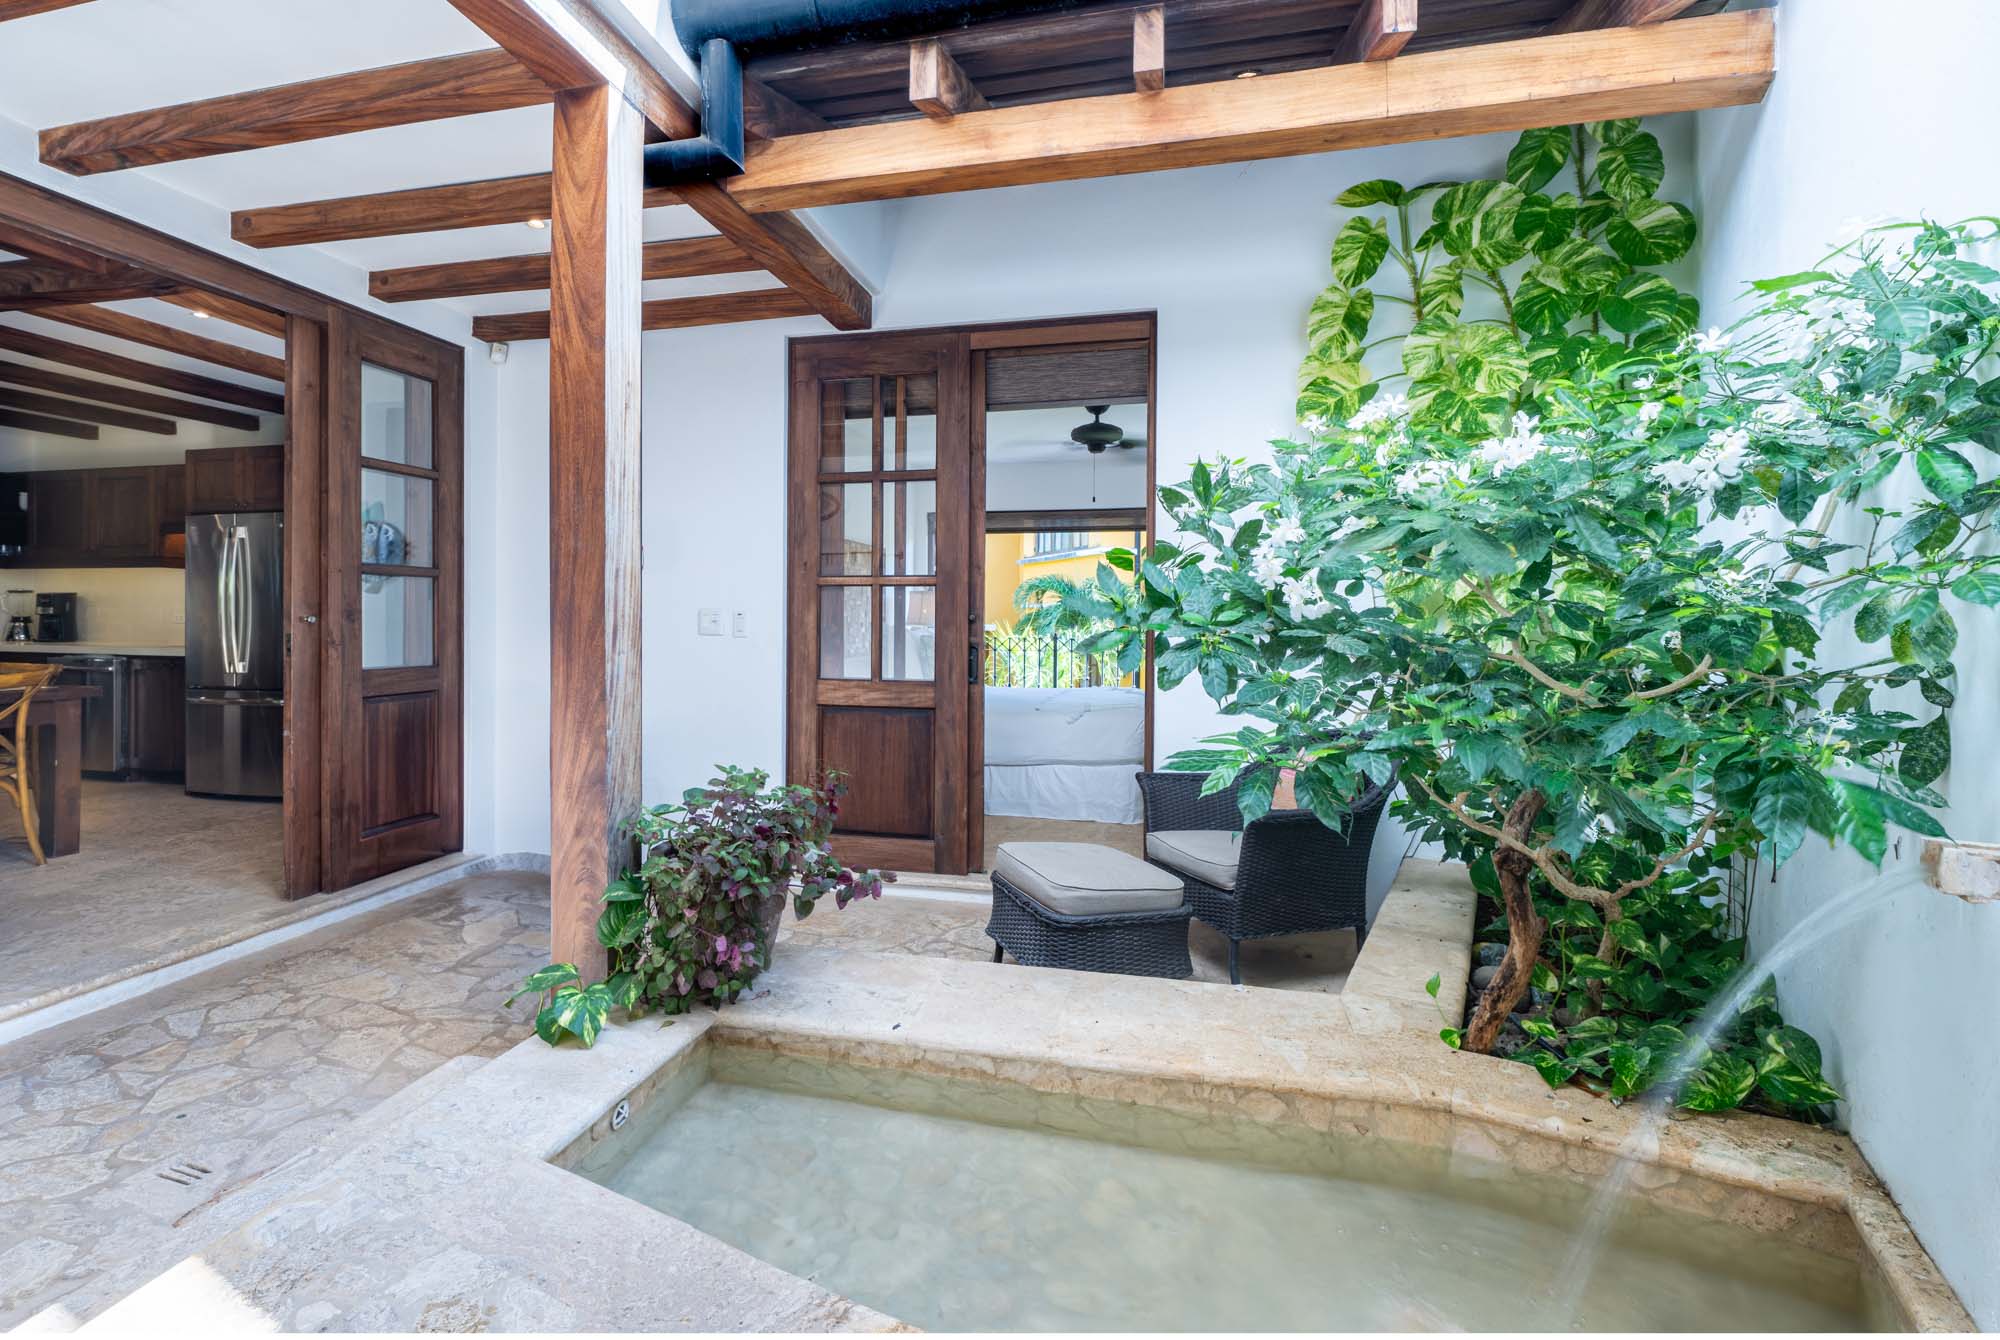 Property Image 1 - Enchanting Flat with Lovely Garden Courtyard